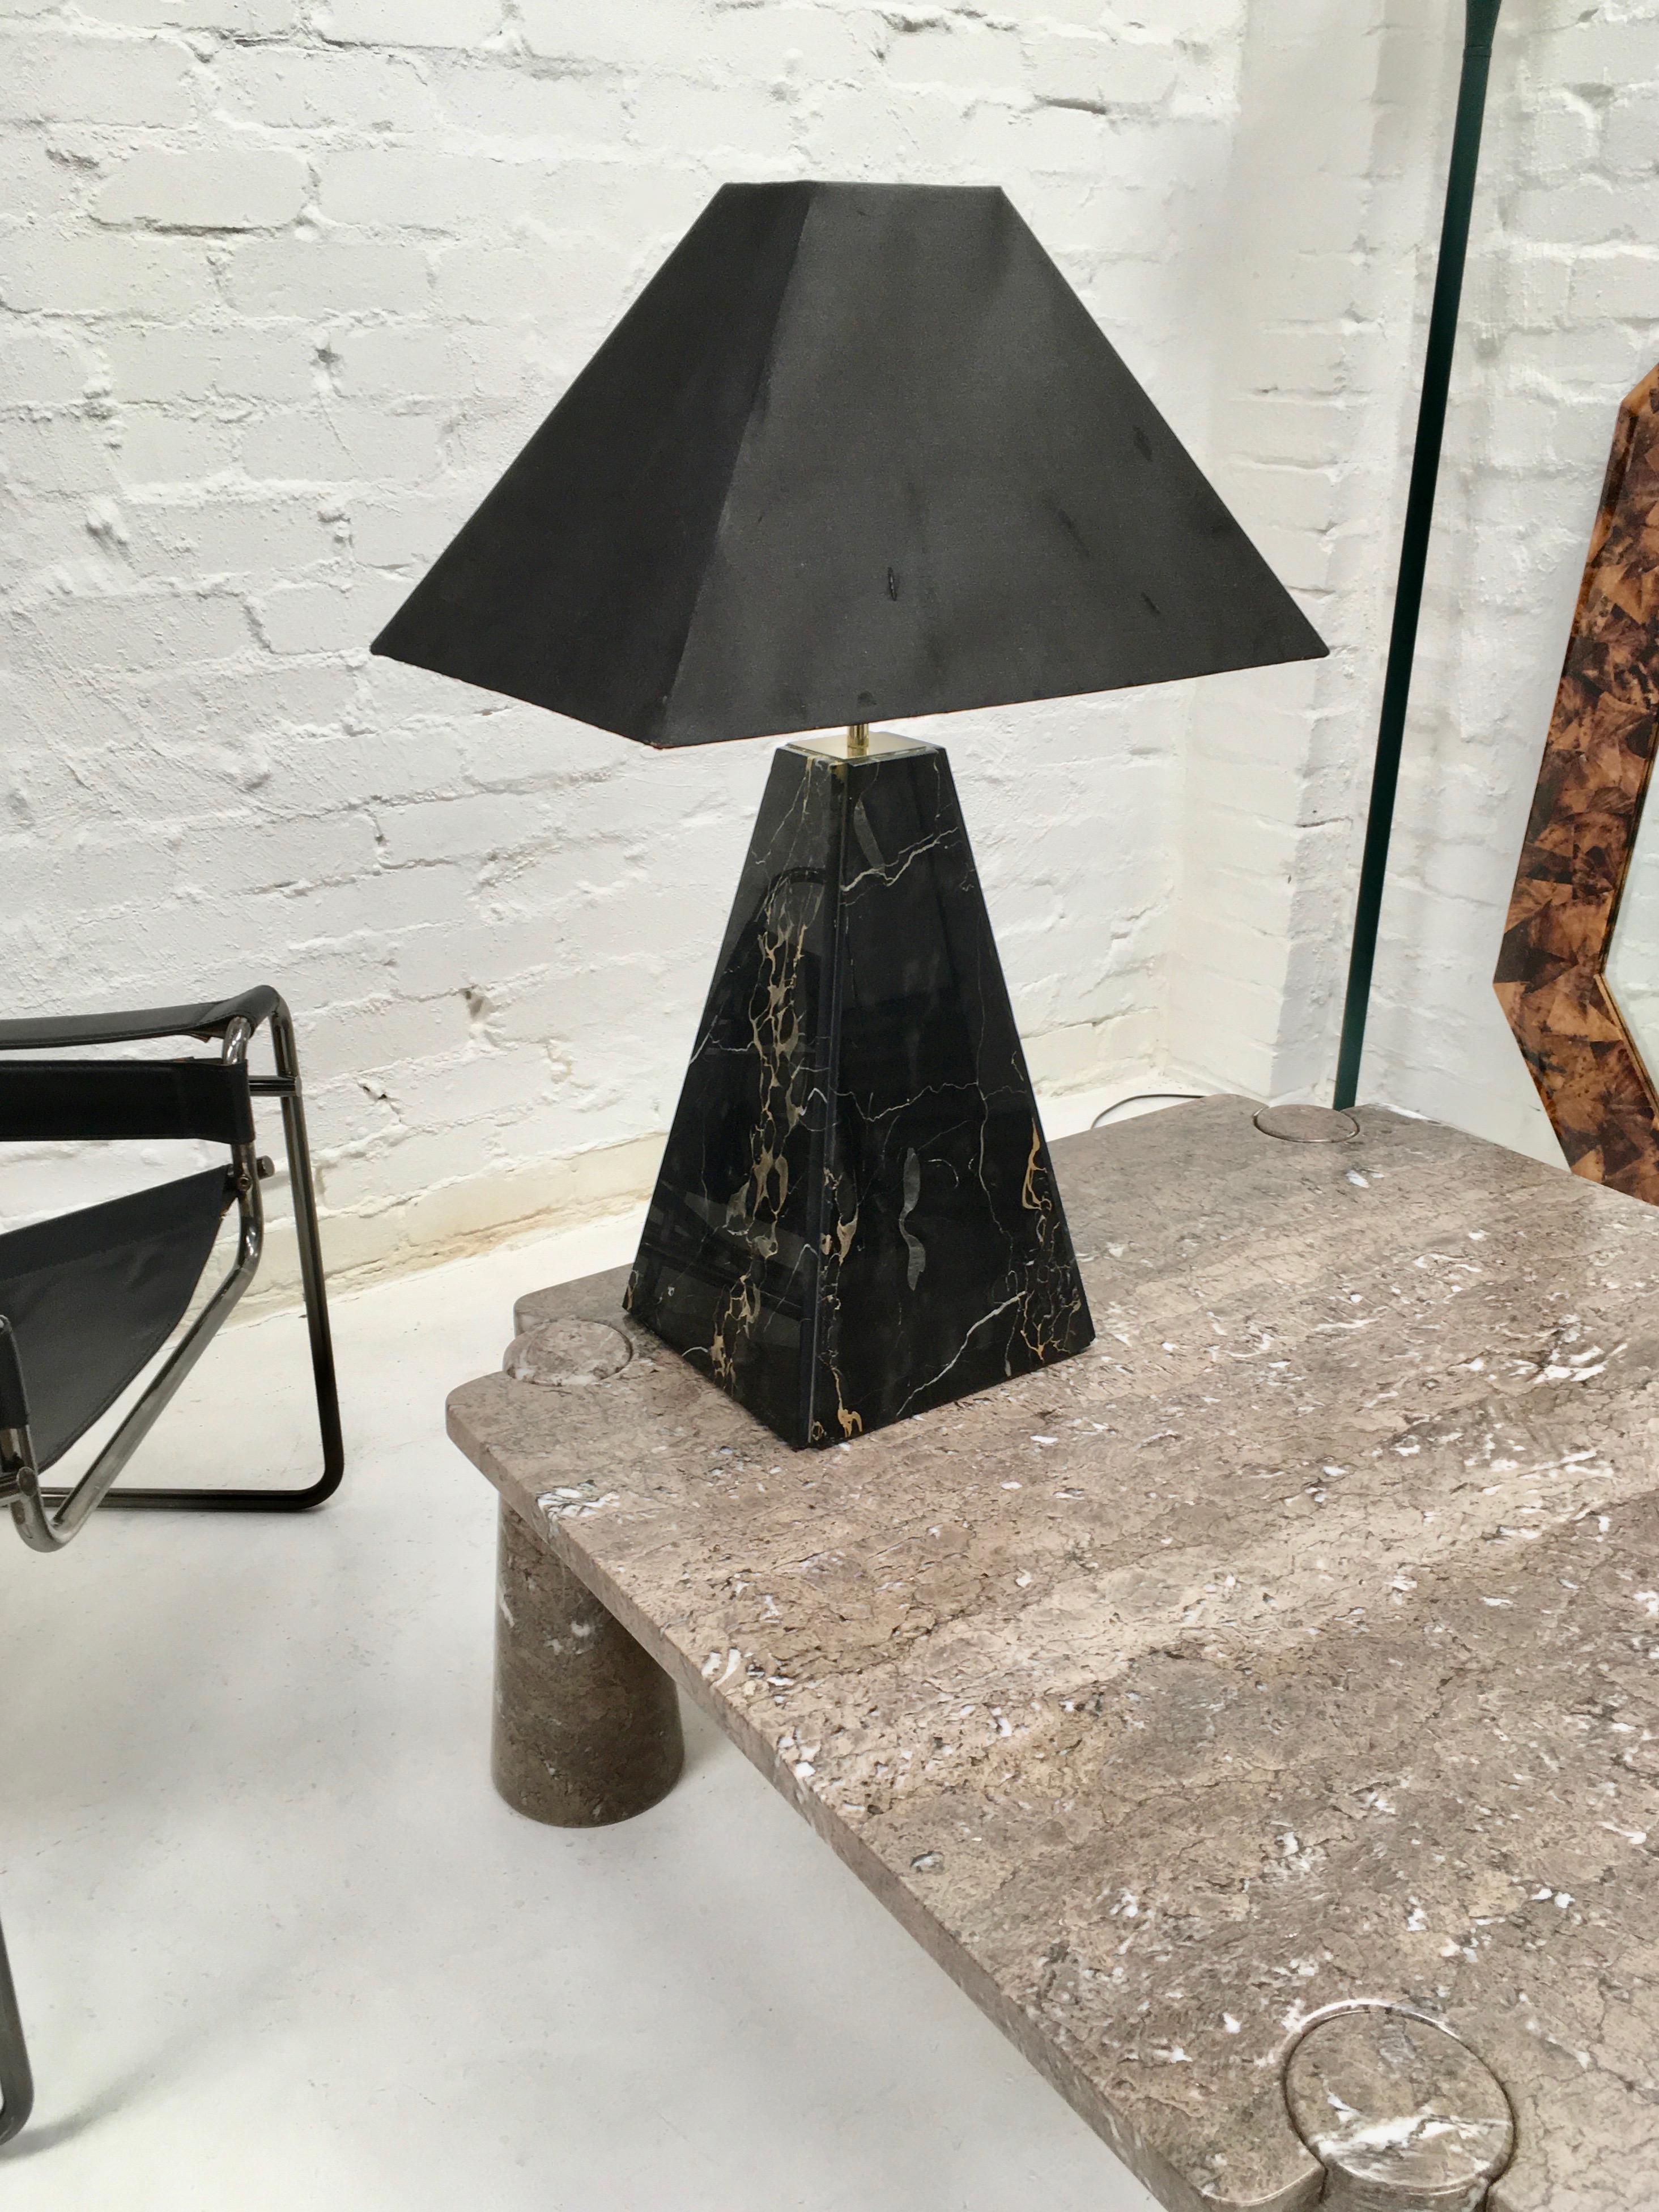 1970s Cini Boeri Style Black Marble Pyramid Lamps Abat Jour, Pair In Good Condition For Sale In Melbourne, AU